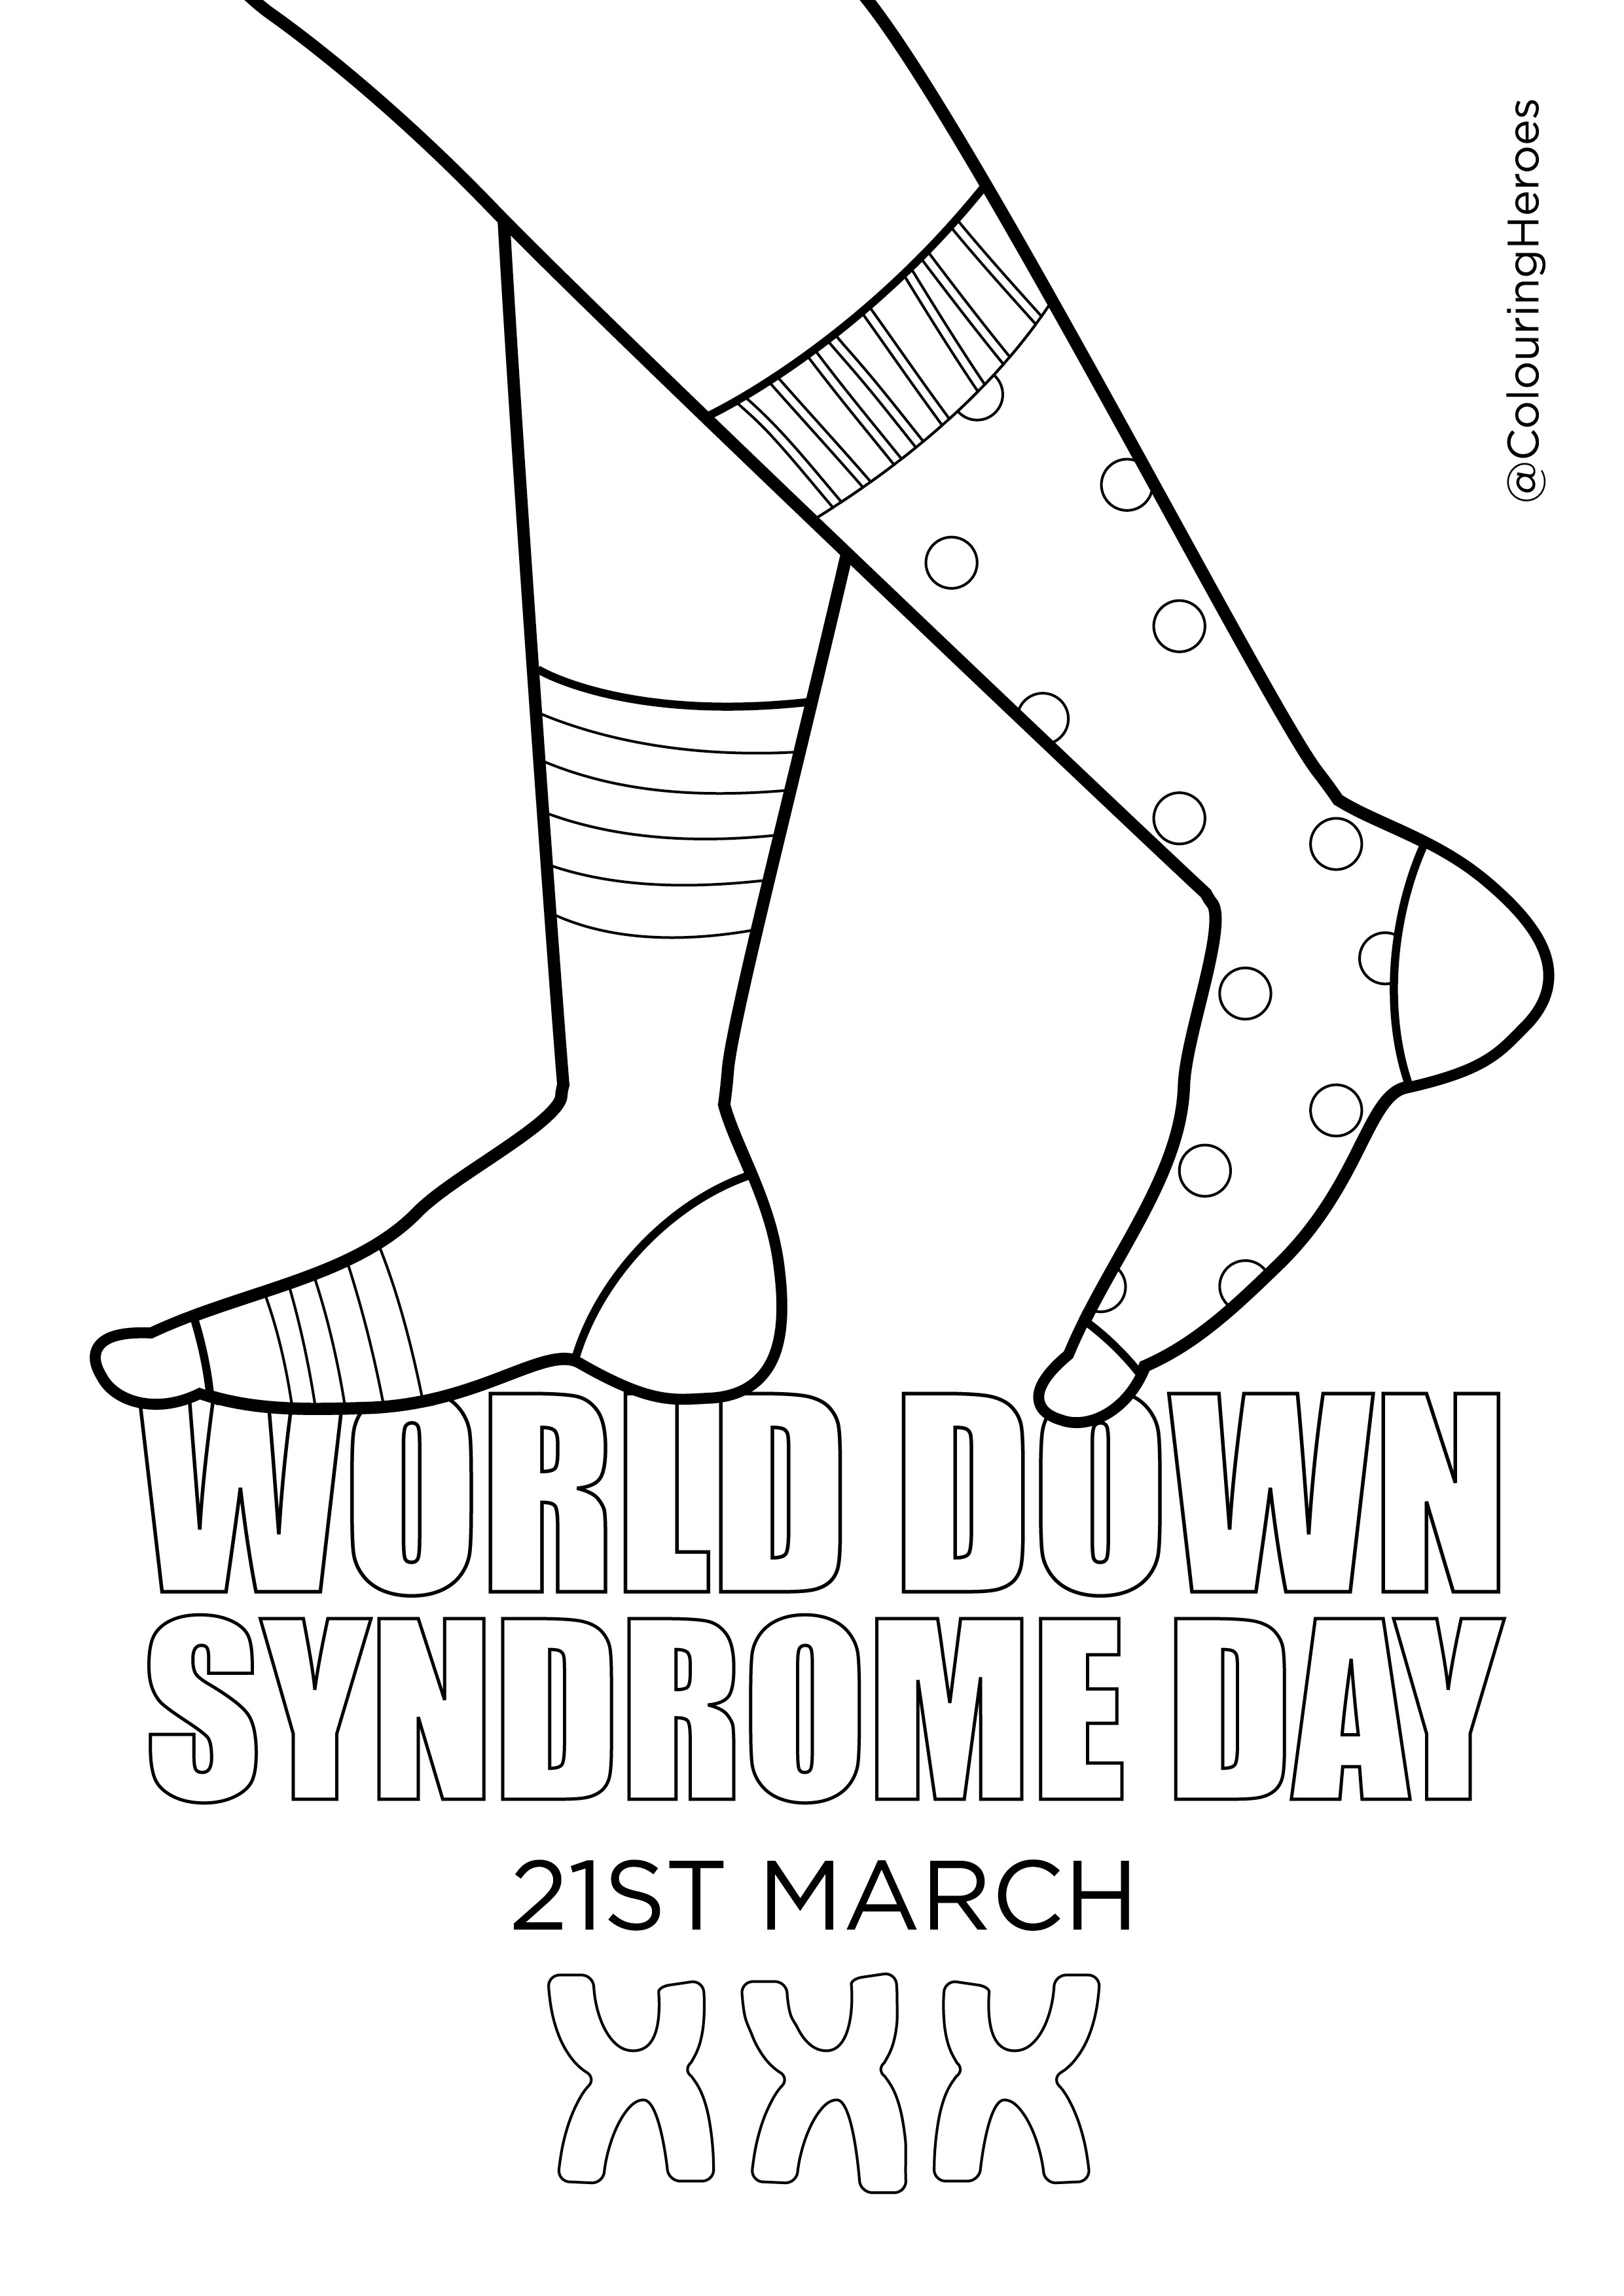 Colouringheroes ð on x ð world down syndrome day ð grab your colouring pencils and don your odd socks to raise awareness for down syndrome on sunday download the template to design